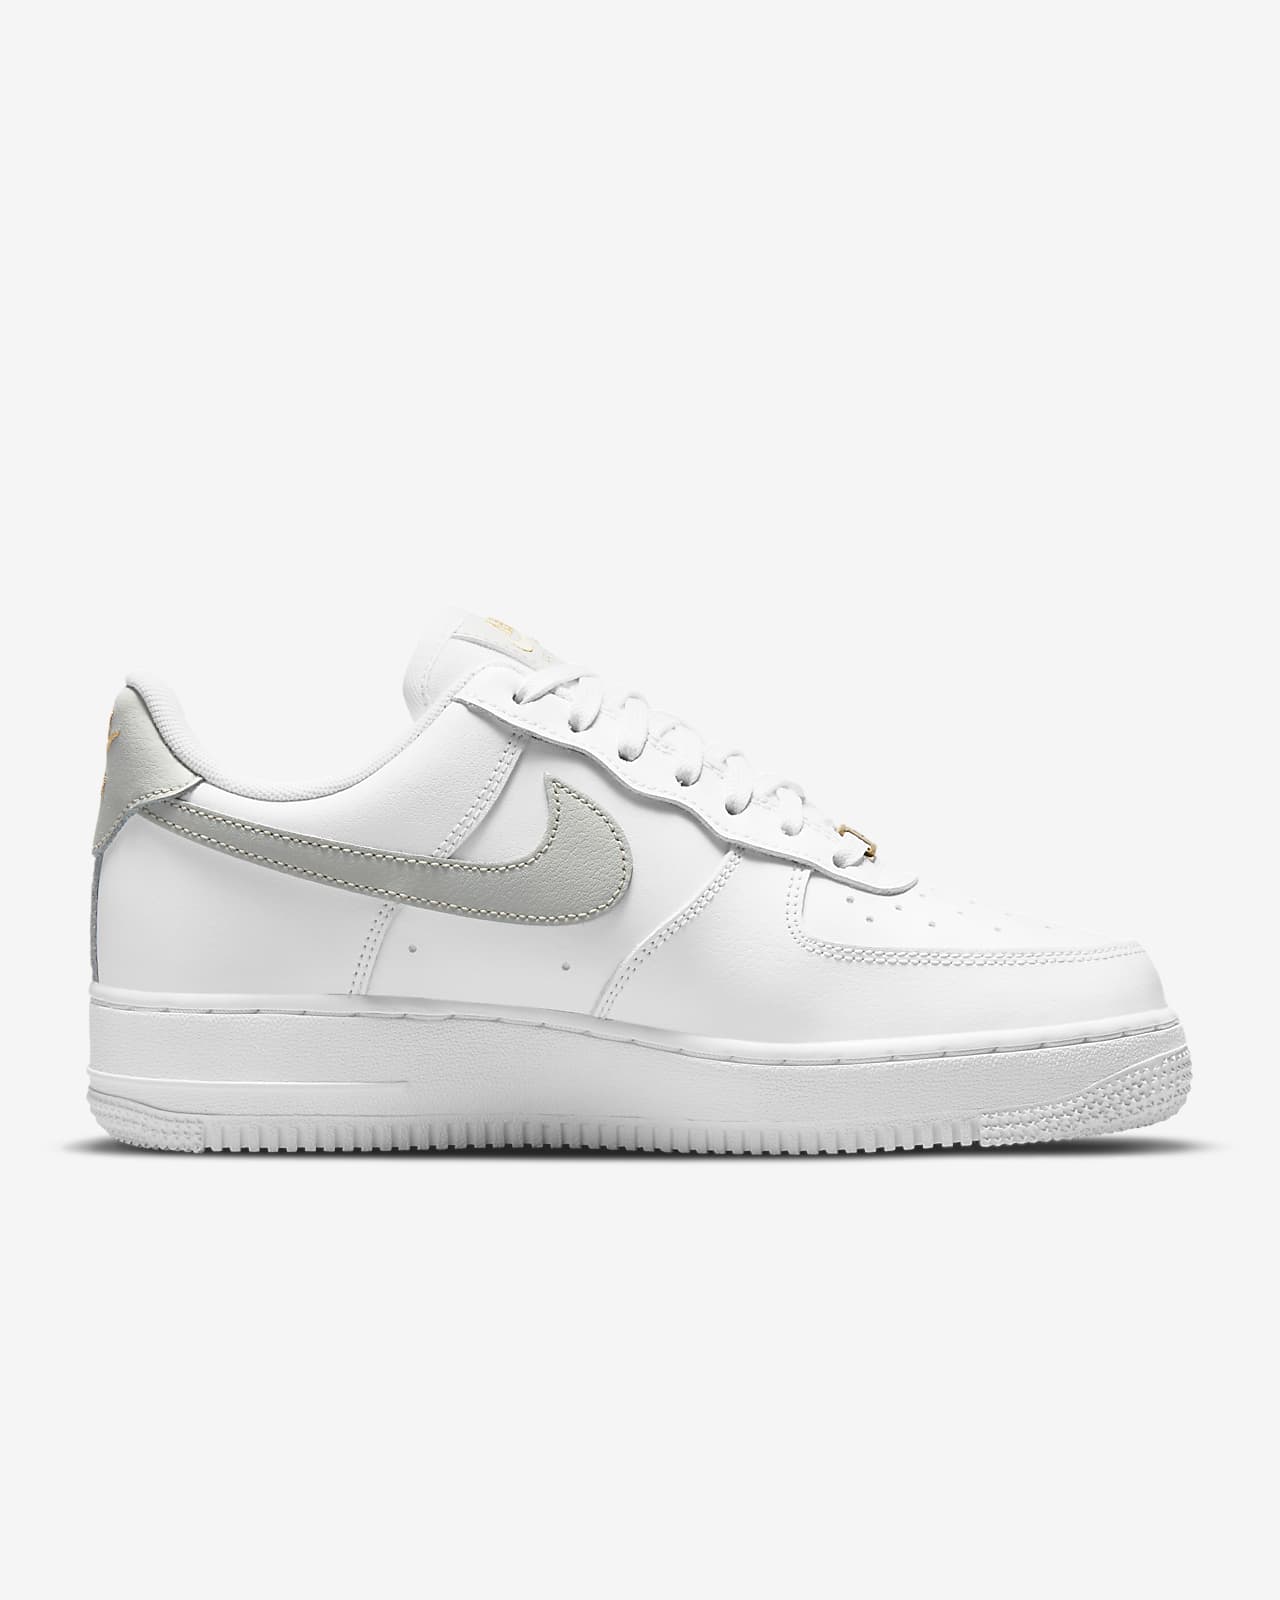 Chaussure Nike Air Force 1 '07 Essential pour Femme